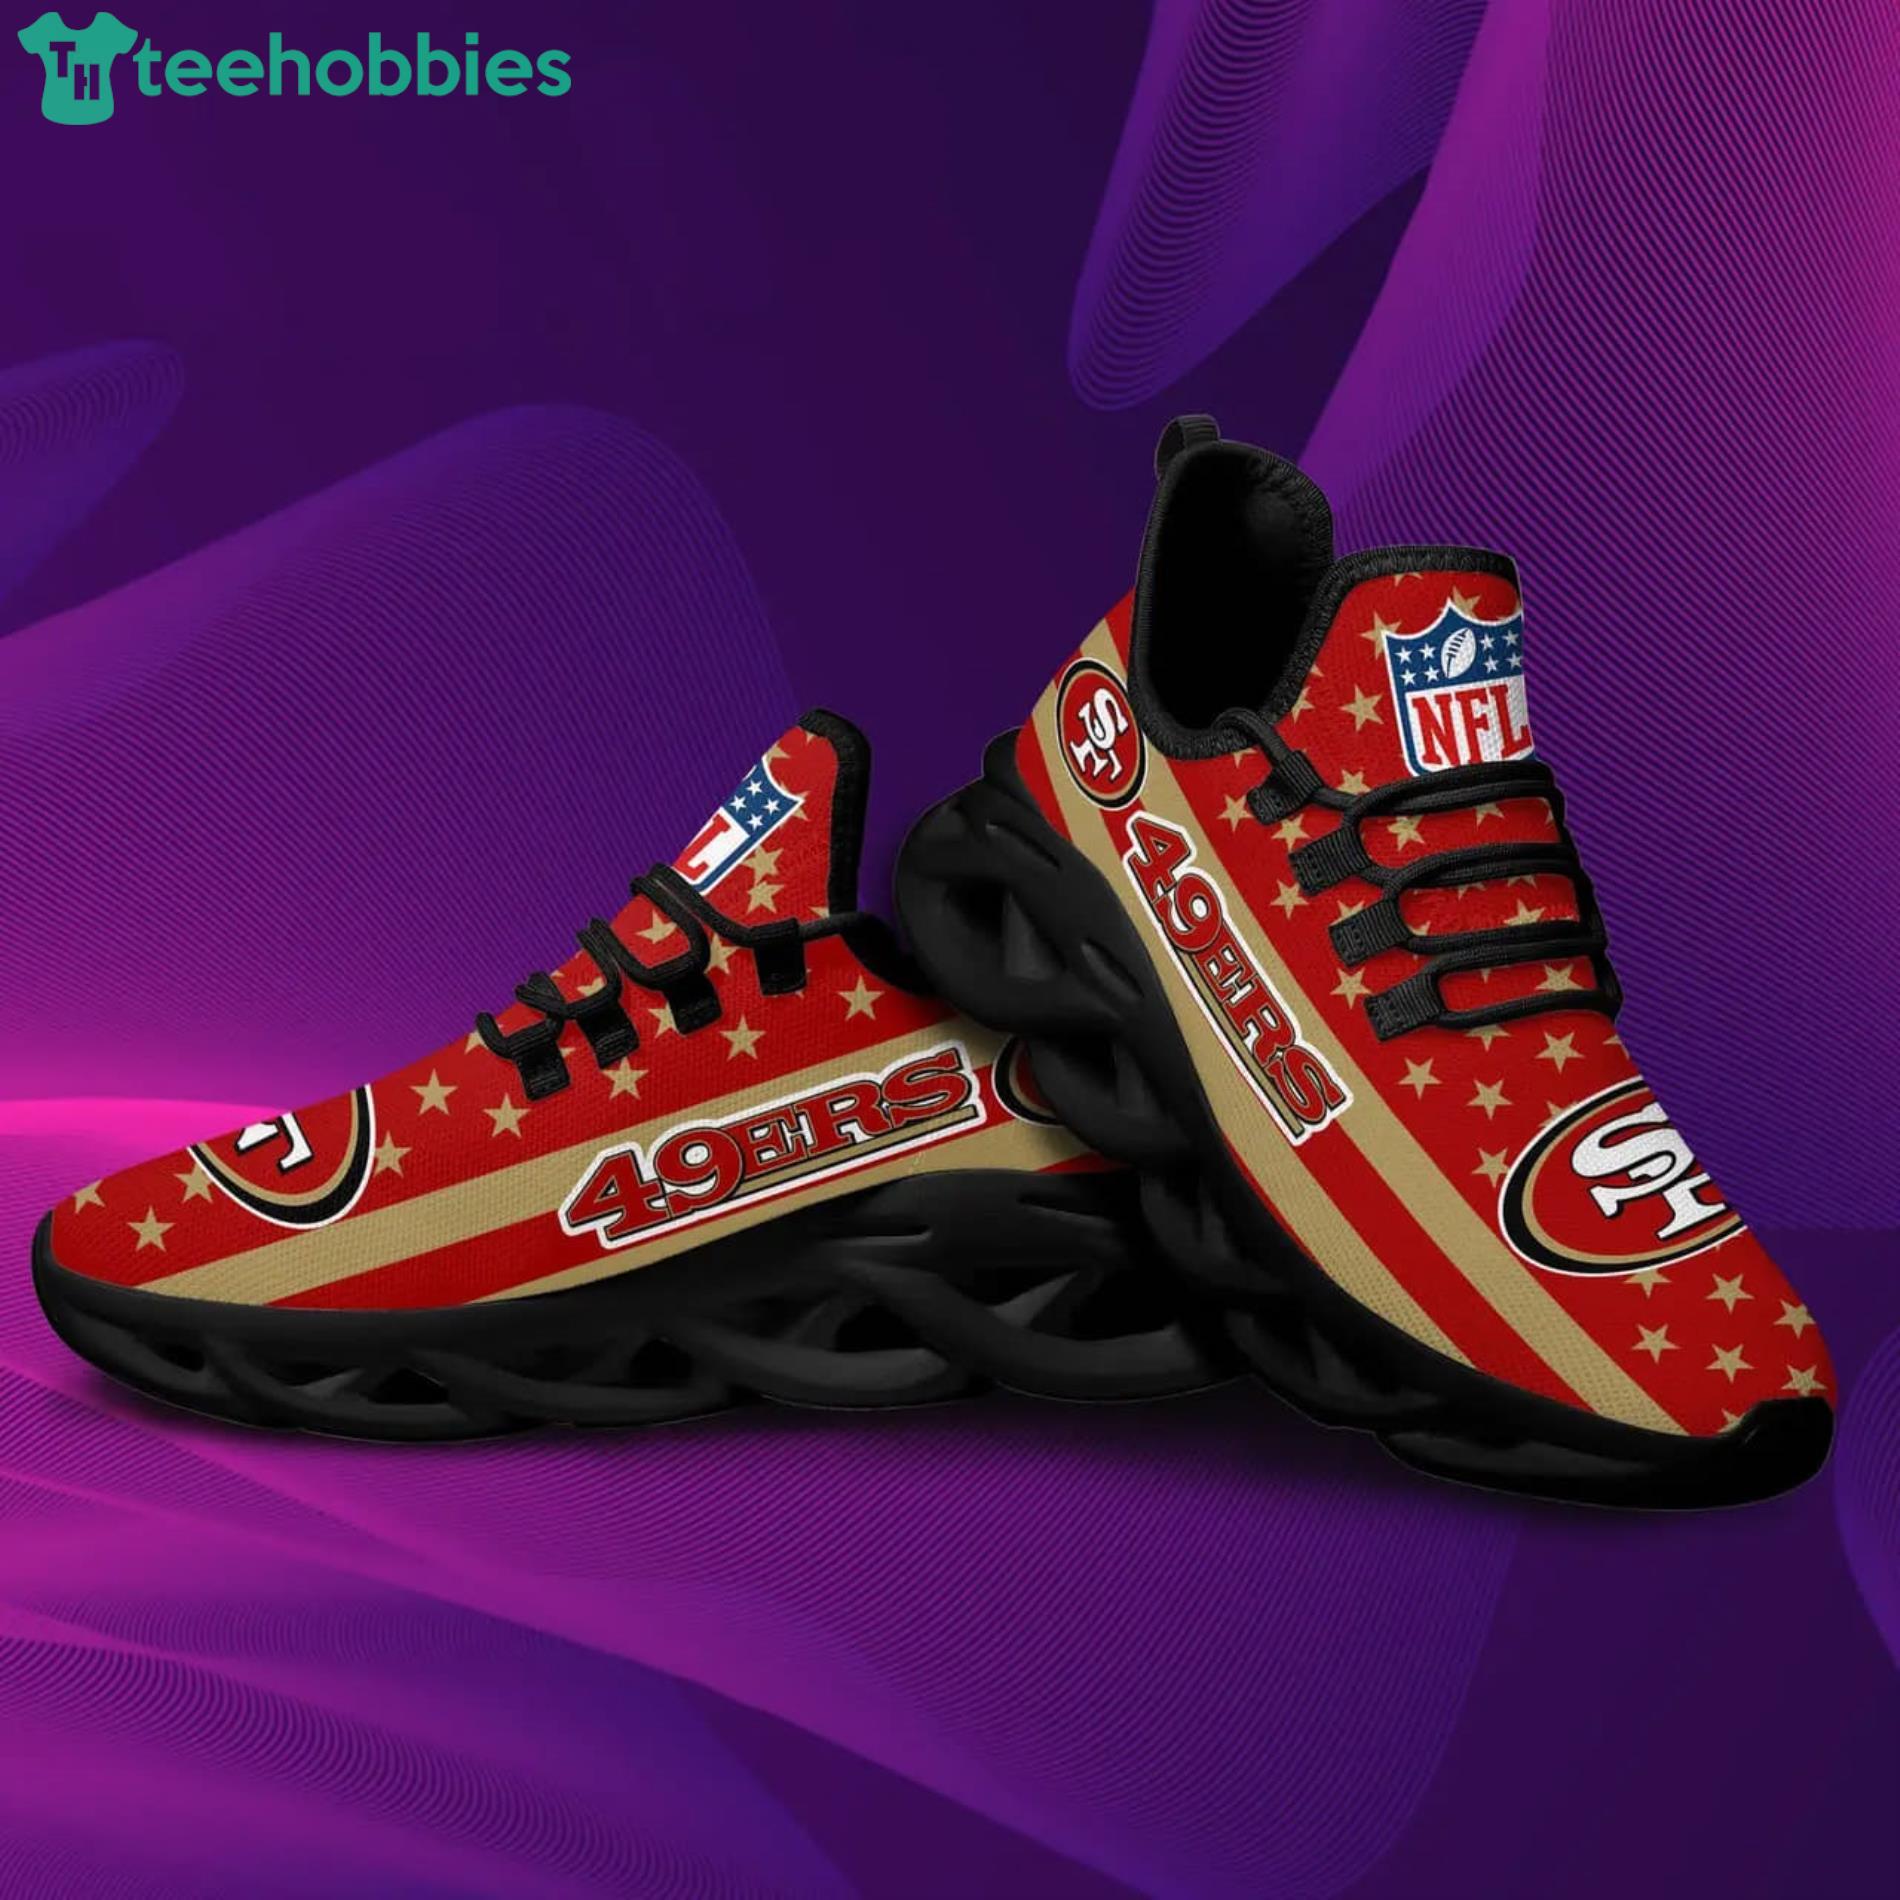 Arizona Cardinals Logo Black Stripe Running Sneaker Max Soul Shoes In Red  Gift For Men And Women - Freedomdesign